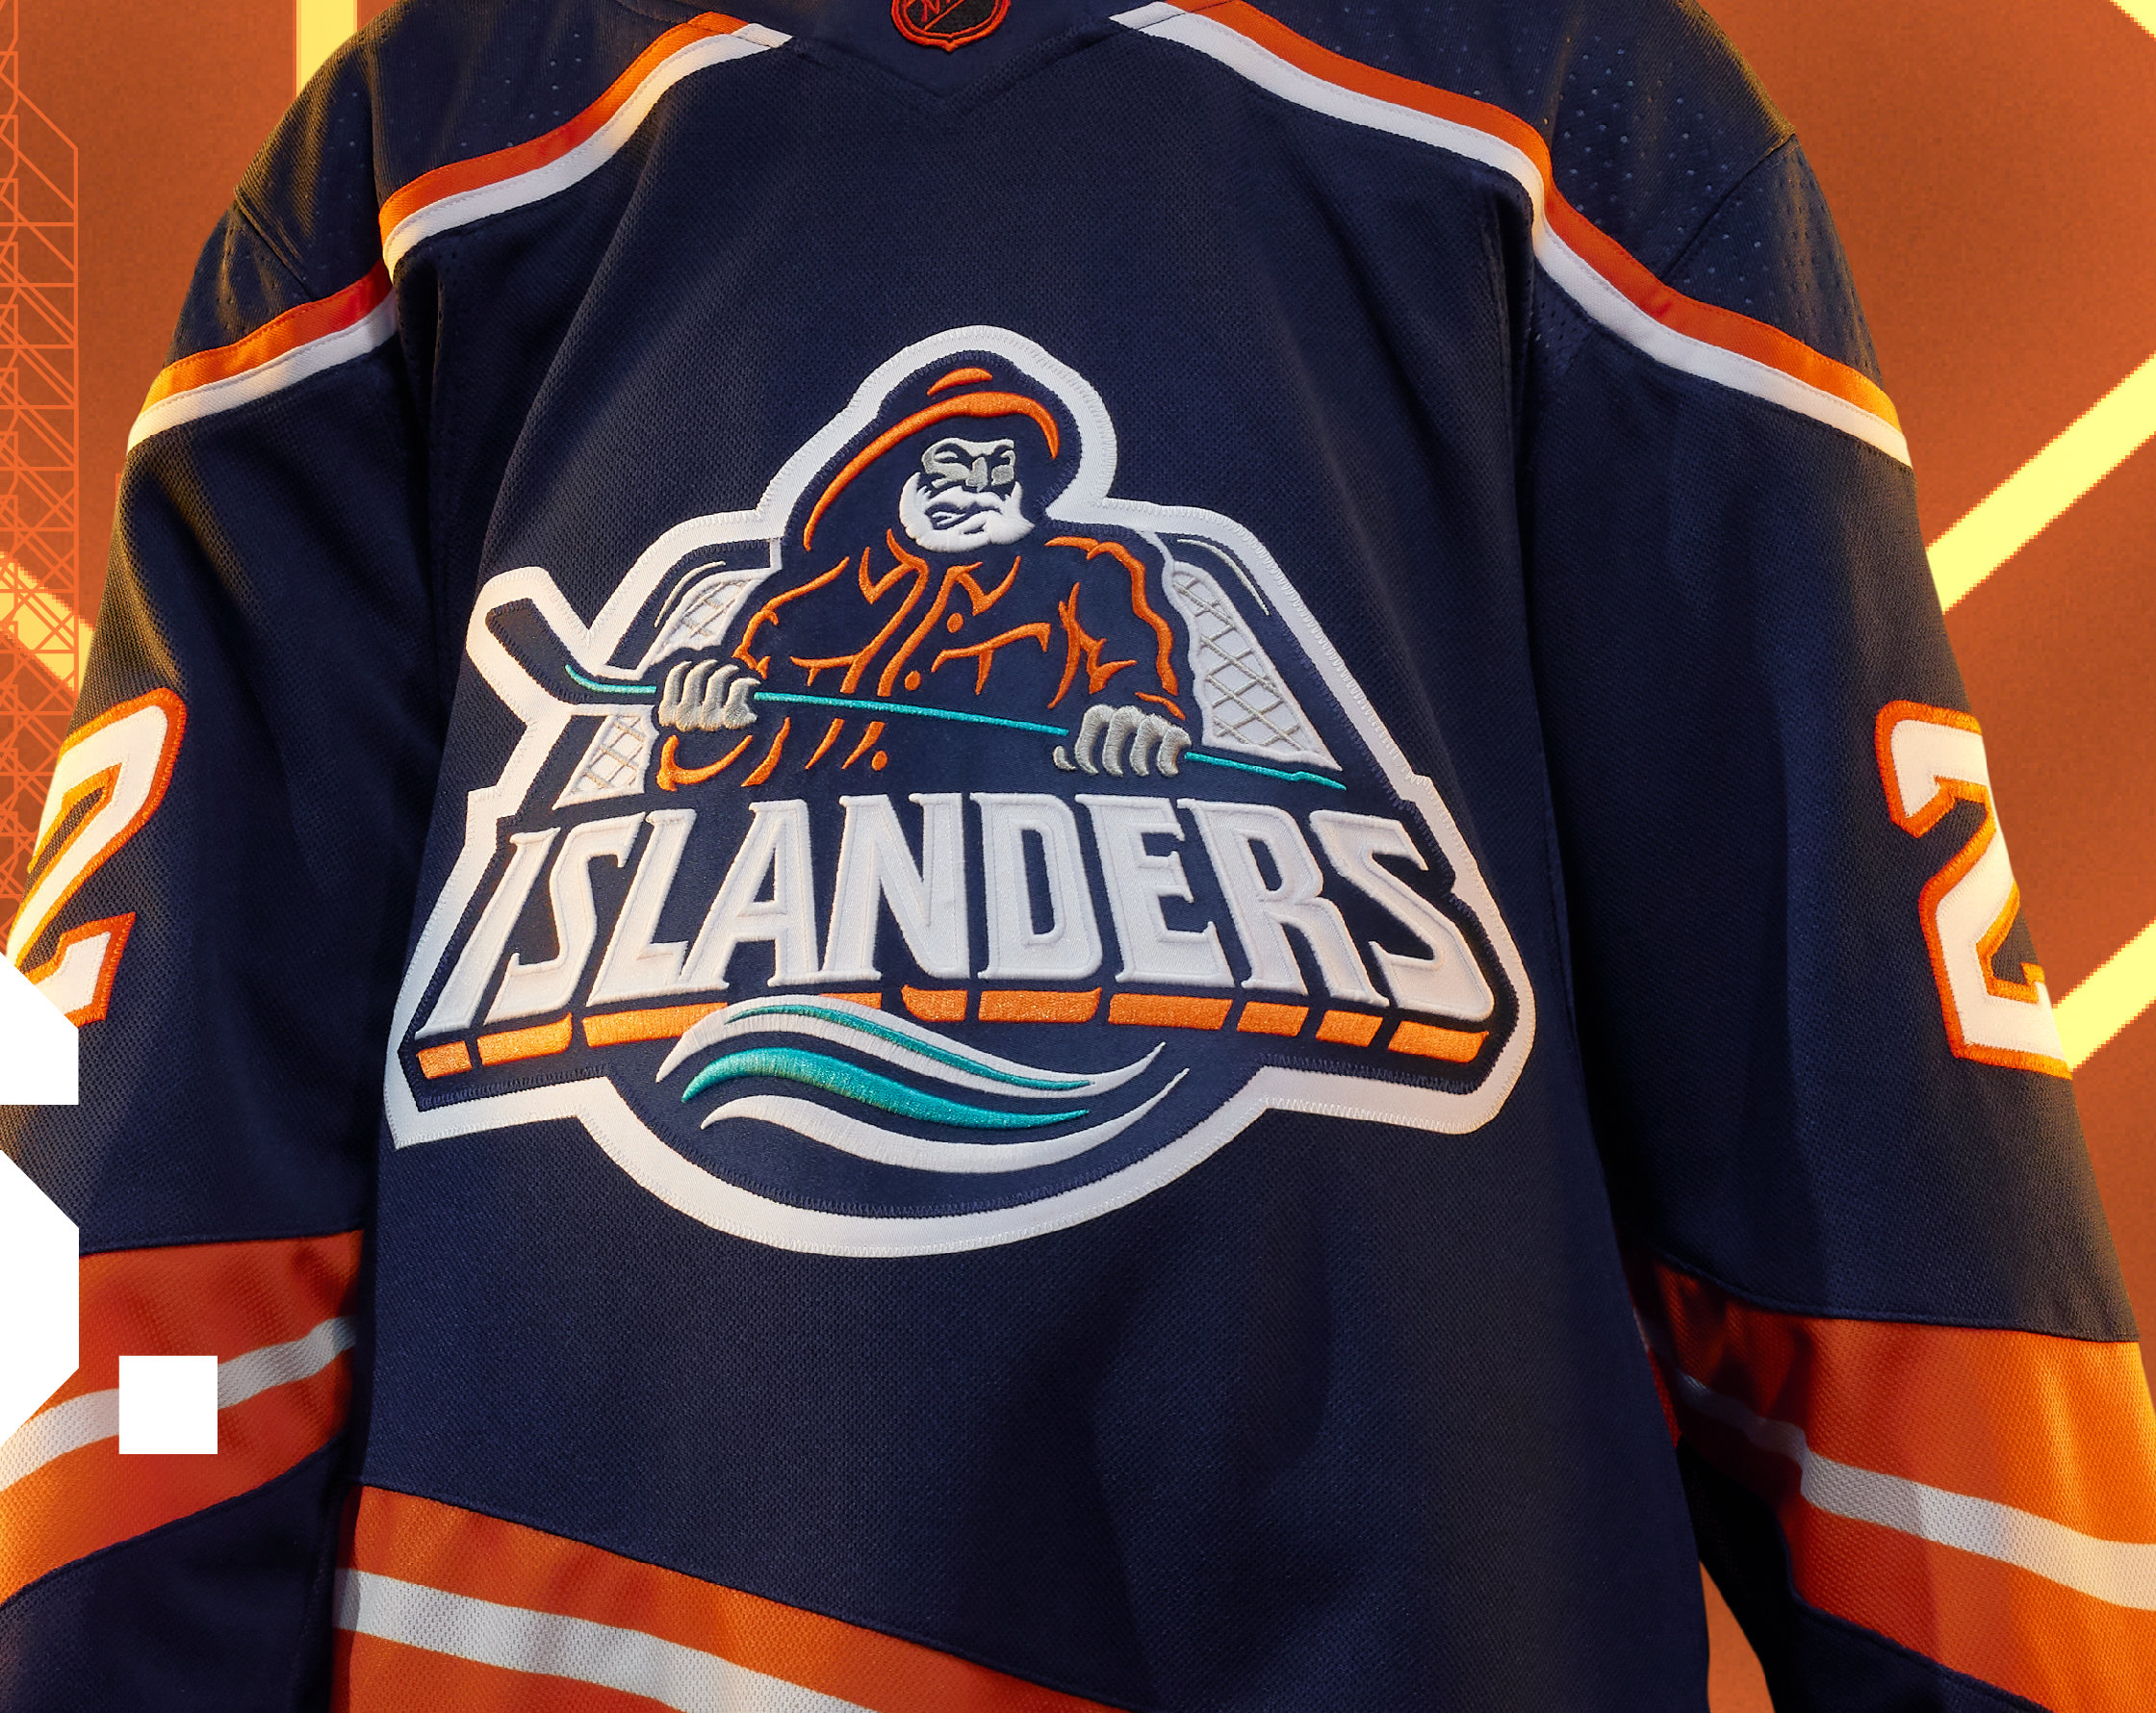 Fish sticks: Revisiting the disastrous Islanders campaign